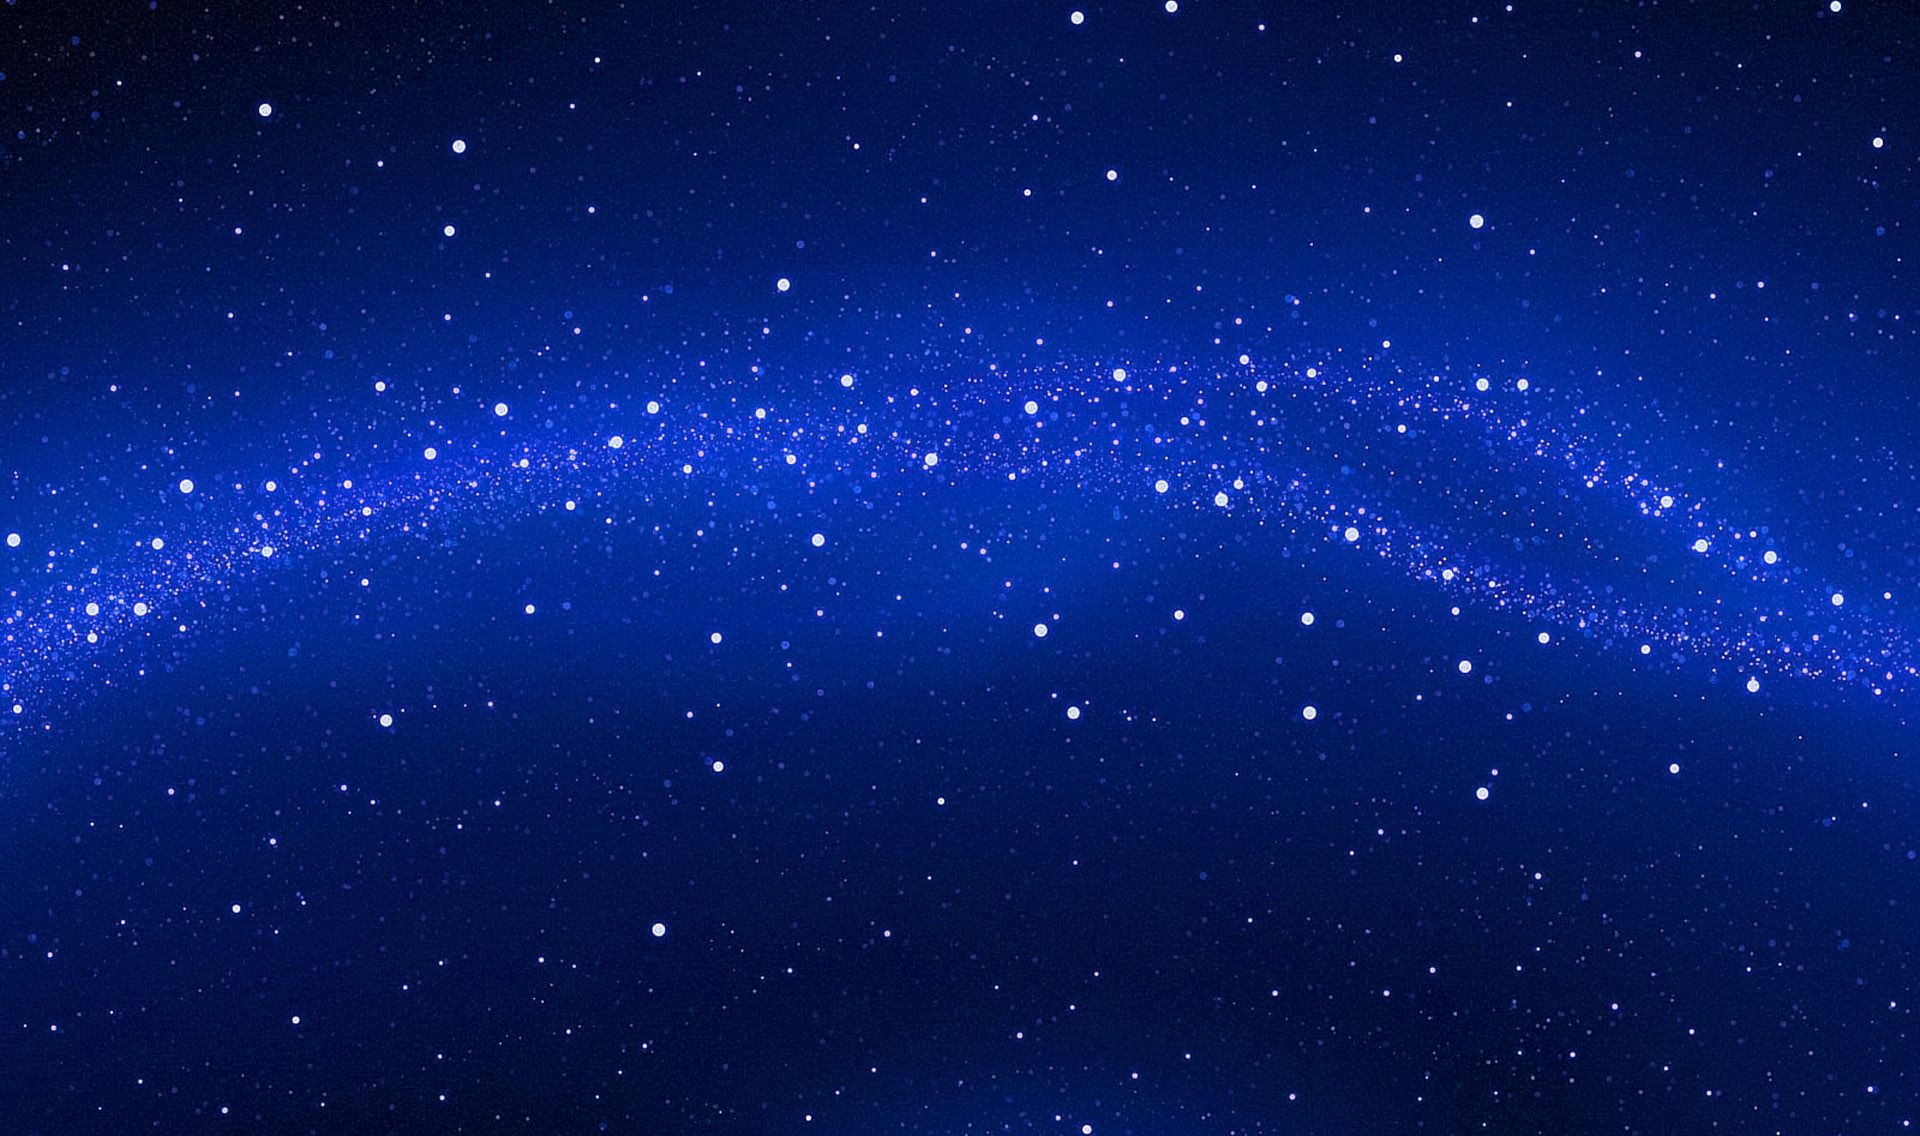 1 Night Sky HD Wallpapers Backgrounds - Wallpaper Abyss